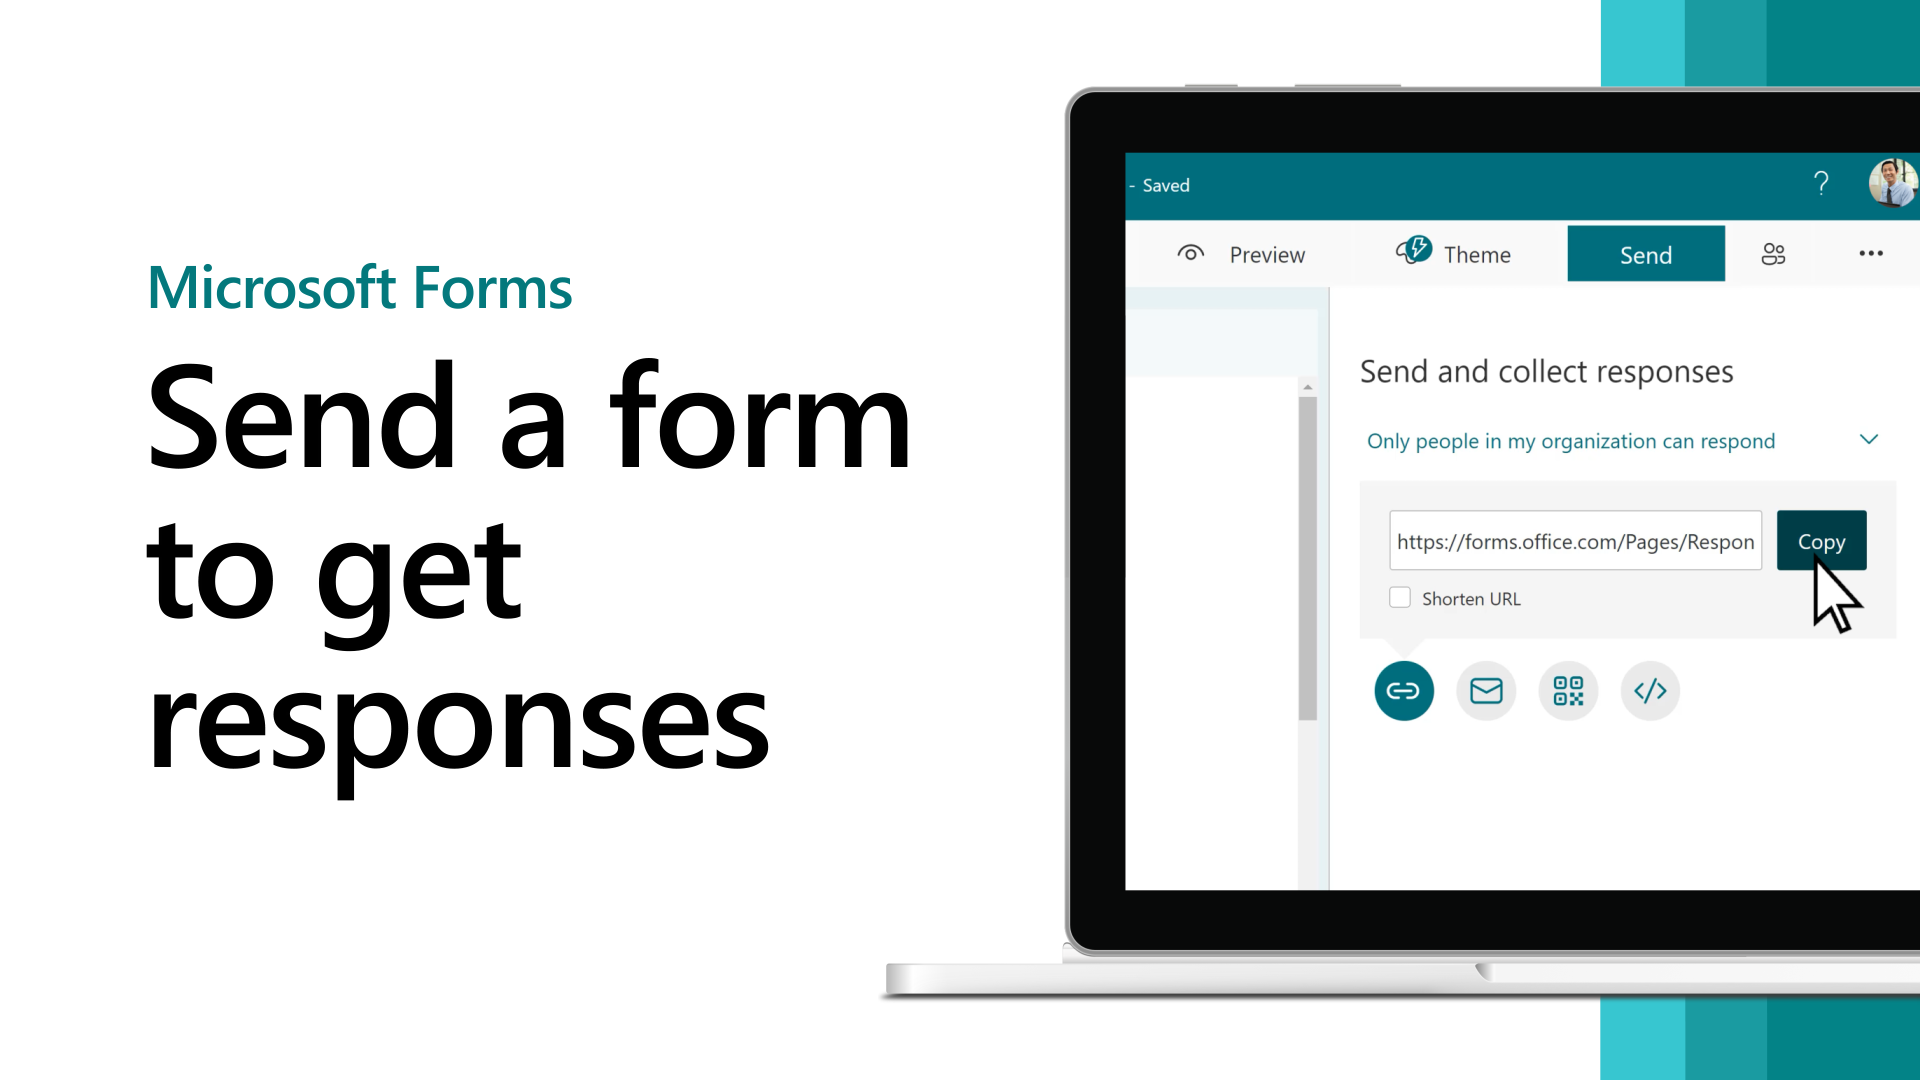 Send a form and collect responses - Microsoft Support